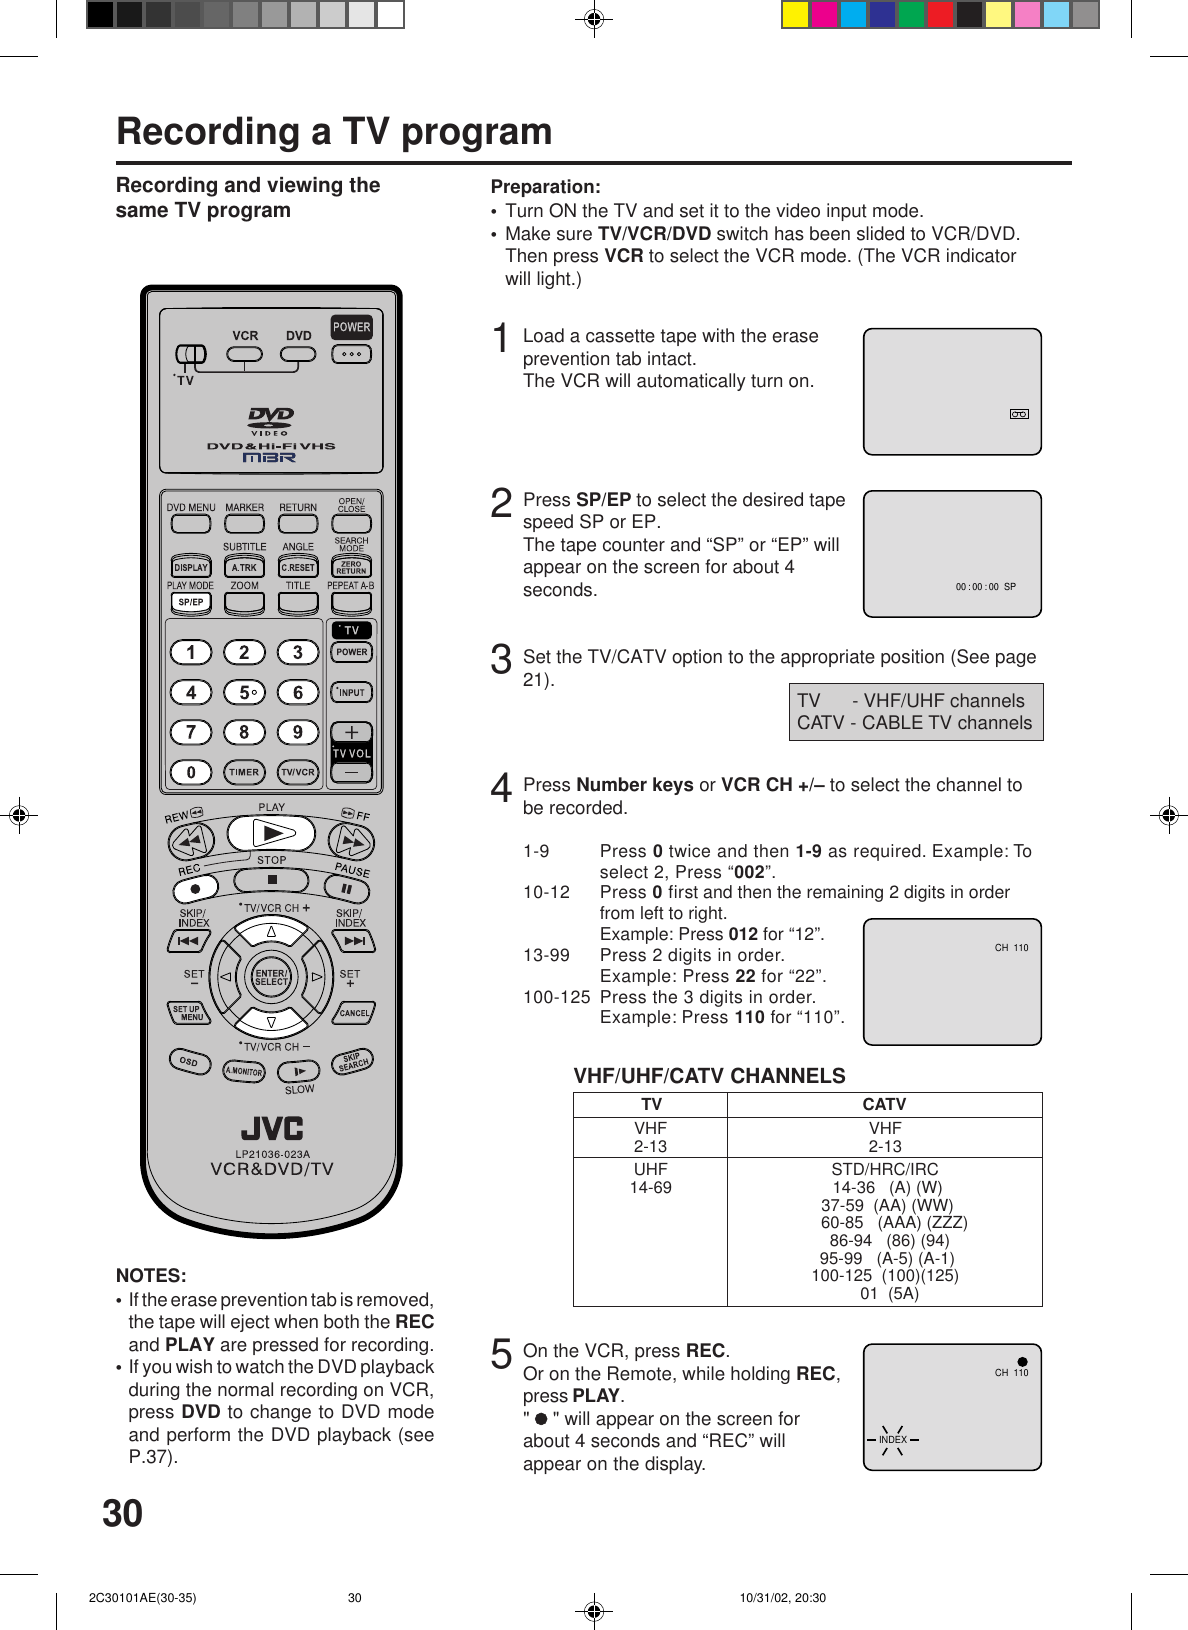 303Recording a TV programLoad a cassette tape with the eraseprevention tab intact.The VCR will automatically turn on.Set the TV/CATV option to the appropriate position (See page21).12Press SP/EP to select the desired tapespeed SP or EP.The tape counter and “SP” or “EP” willappear on the screen for about 4seconds.4TV      - VHF/UHF channelsCATV - CABLE TV channelsRecording and viewing thesame TV programPress Number keys or VCR CH +/– to select the channel tobe recorded.VHF/UHF/CATV CHANNELSTV CATVVHF2-13UHF14-69VHF2-13STD/HRC/IRC 14-36   (A) (W) 37-59  (AA) (WW)    60-85   (AAA) (ZZZ)  86-94   (86) (94) 95-99   (A-5) (A-1)100-125  (100)(125)  01  (5A)5On the VCR, press REC.Or on the Remote, while holding REC,press PLAY.&quot;   &quot; will appear on the screen forabout 4 seconds and “REC” willappear on the display.NOTES:If the erase prevention tab is removed,the tape will eject when both the RECand PLAY are pressed for recording.If you wish to watch the DVD playbackduring the normal recording on VCR,press DVD to change to DVD modeand perform the DVD playback (seeP.37).••Turn ON the TV and set it to the video input mode.Make sure TV/VCR/DVD switch has been slided to VCR/DVD.Then press VCR to select the VCR mode. (The VCR indicatorwill light.)Preparation:••00 : 00 : 00  SPCH  110CH  110INDEX1-9 Press 0 twice and then 1-9 as required. Example: Toselect 2, Press “002”.10-12 Press 0 first and then the remaining 2 digits in orderfrom left to right.Example: Press 012 for “12”.13-99 Press 2 digits in order.Example: Press 22 for “22”.100-125 Press the 3 digits in order.Example: Press 110 for “110”. 2C30101AE(30-35) 10/31/02, 20:3030